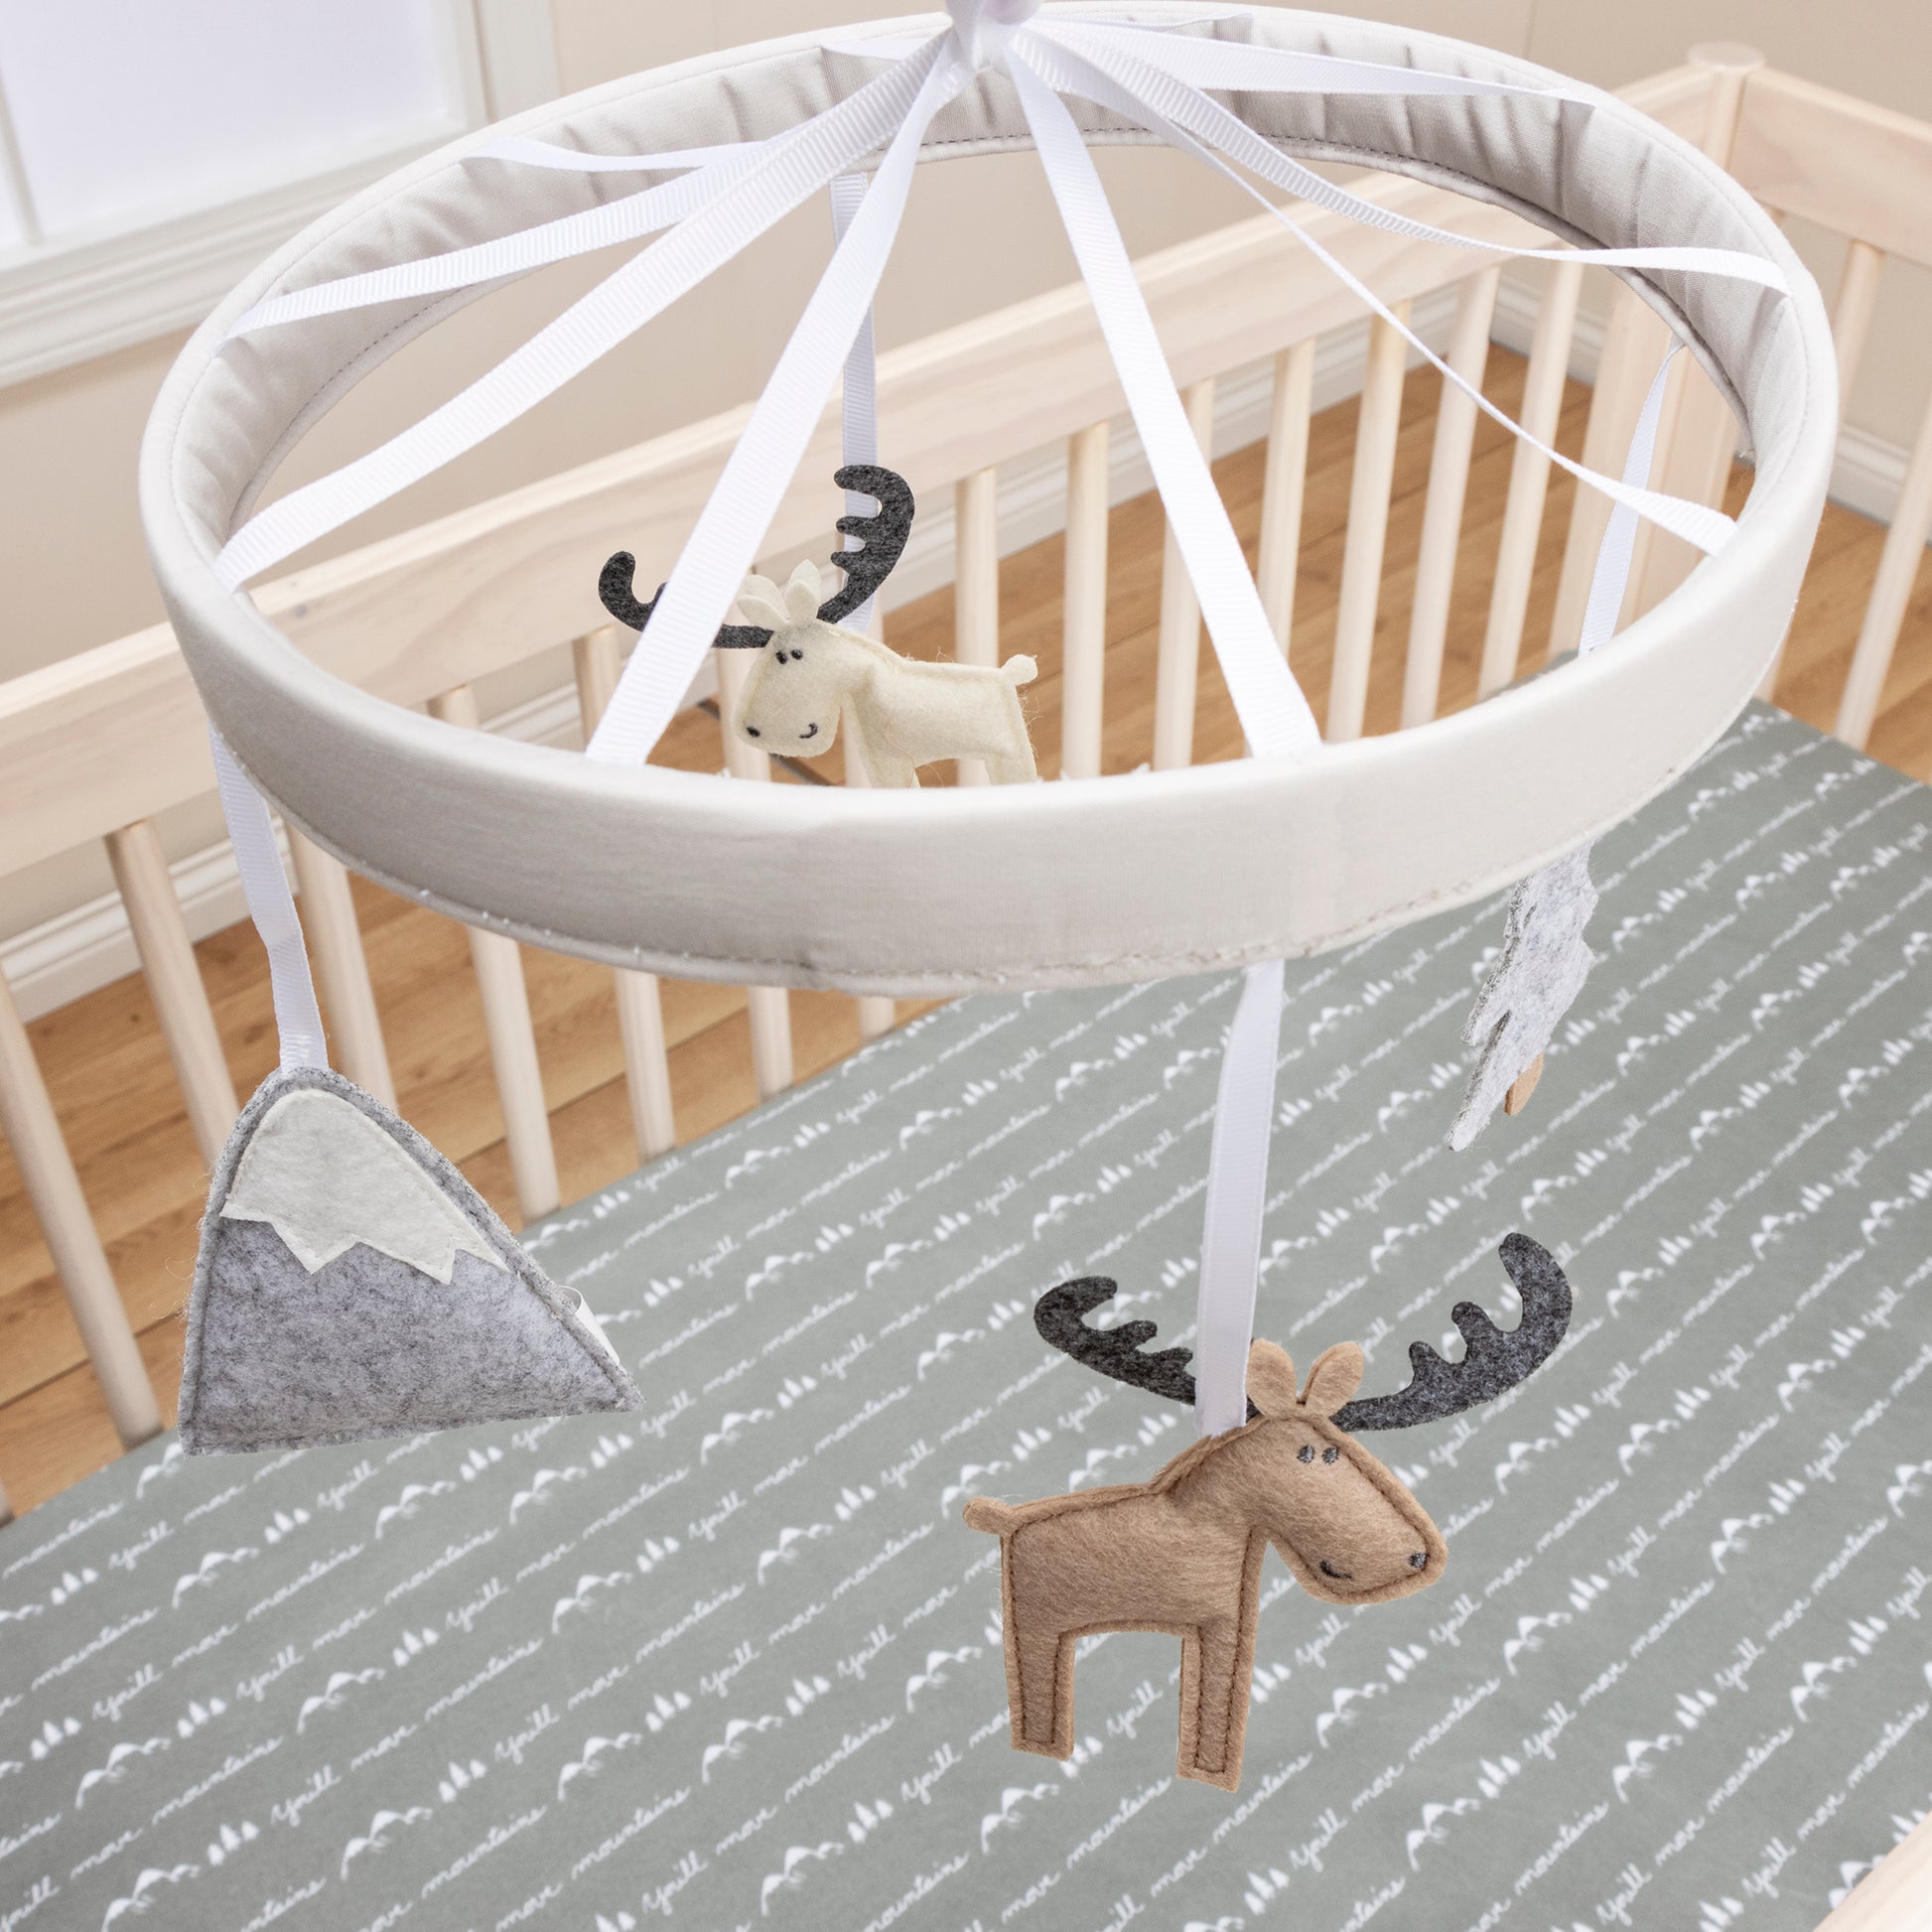 Stylized In Room Angled Image- Big Sky Musical Crib Baby Mobile- eaturing a simple solid soft gray 1-inch banded mobile ring, with a white slide cover. Two smiley moose, a mountain and a pine tree from felt are suspended from decorative white ribbons to s